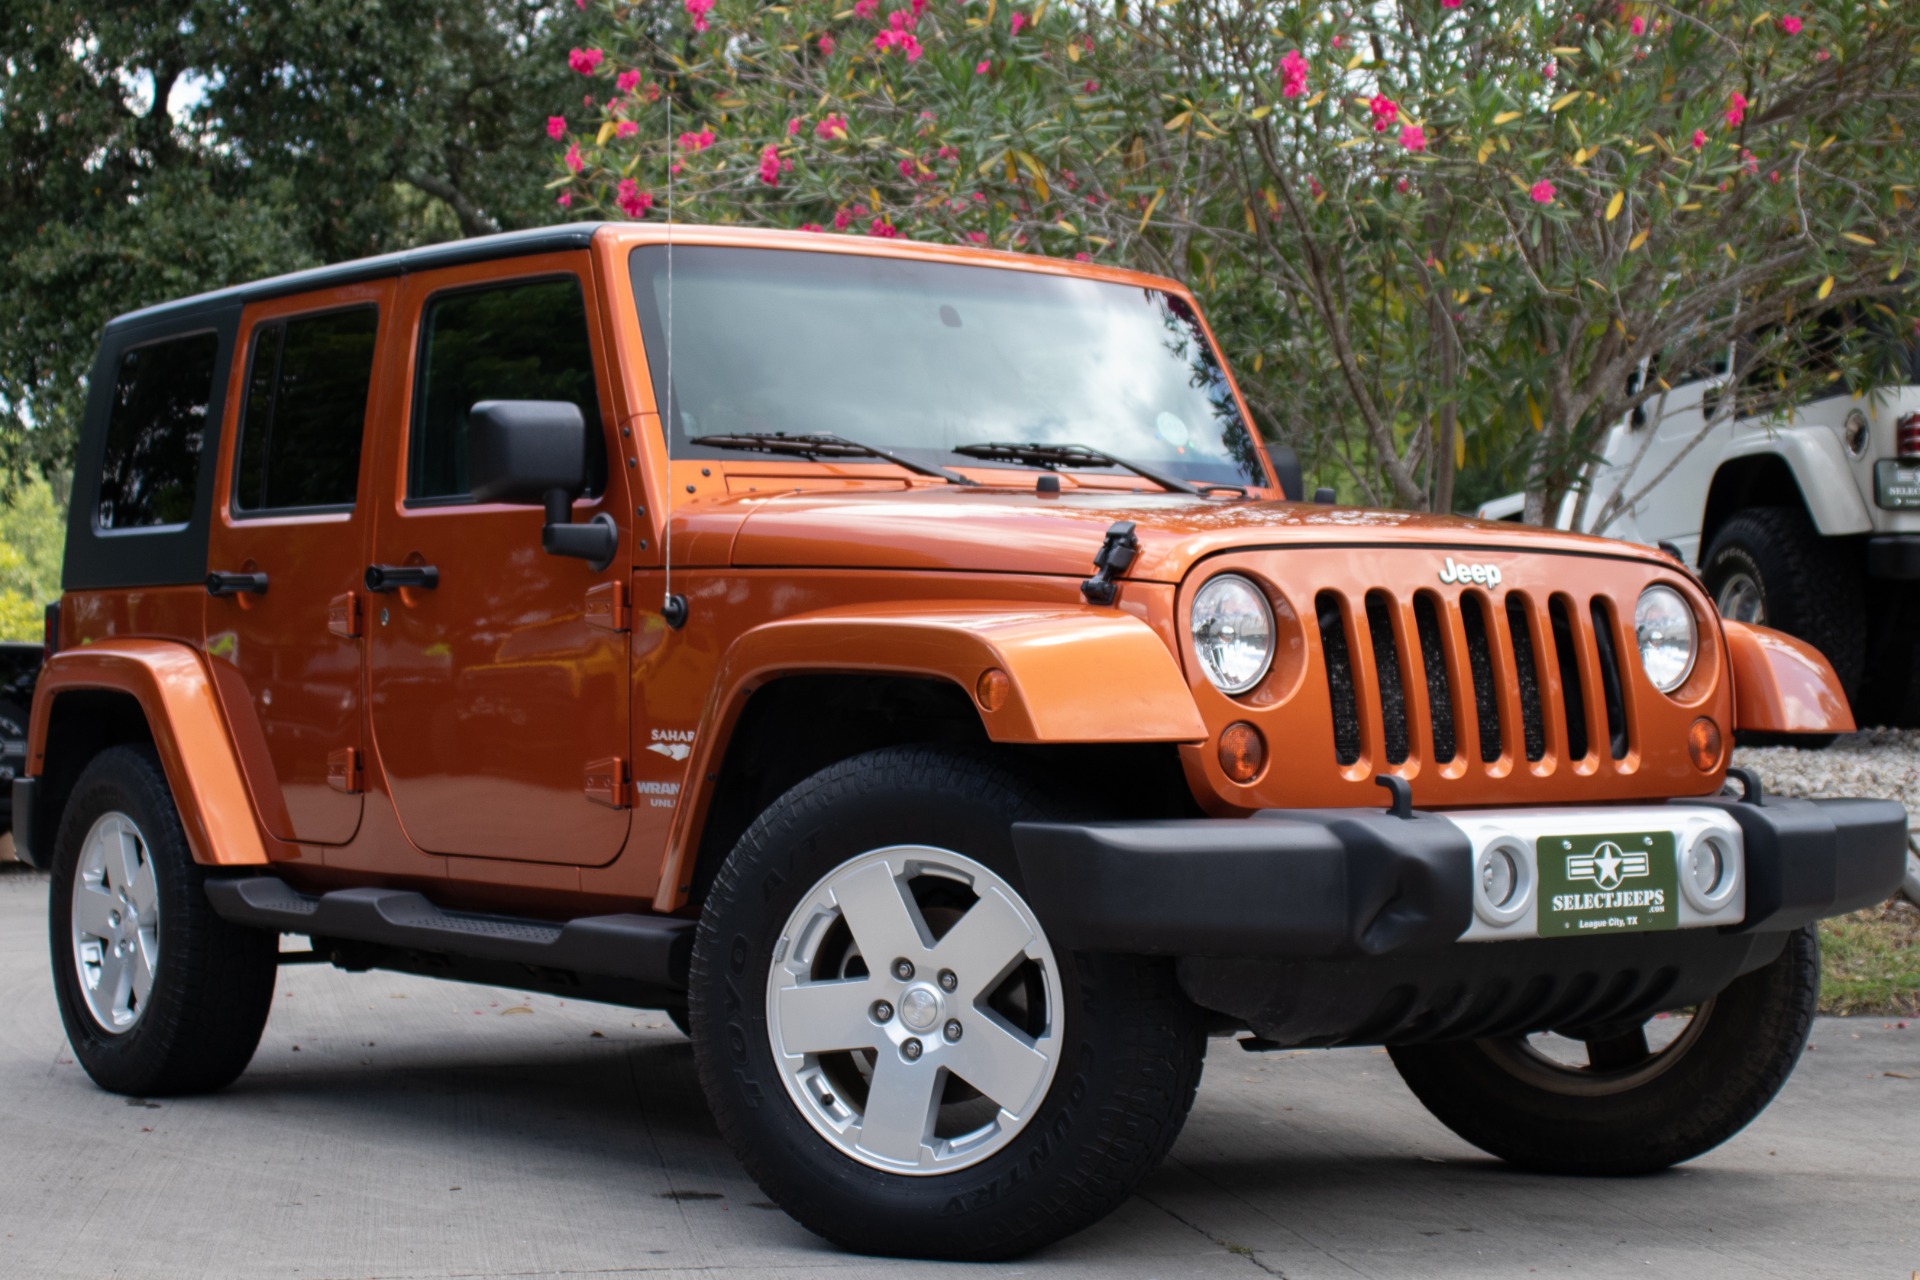 Used 2010 Jeep Wrangler Unlimited Sahara For Sale ($21,995) | Select Jeeps  Inc. Stock #222332